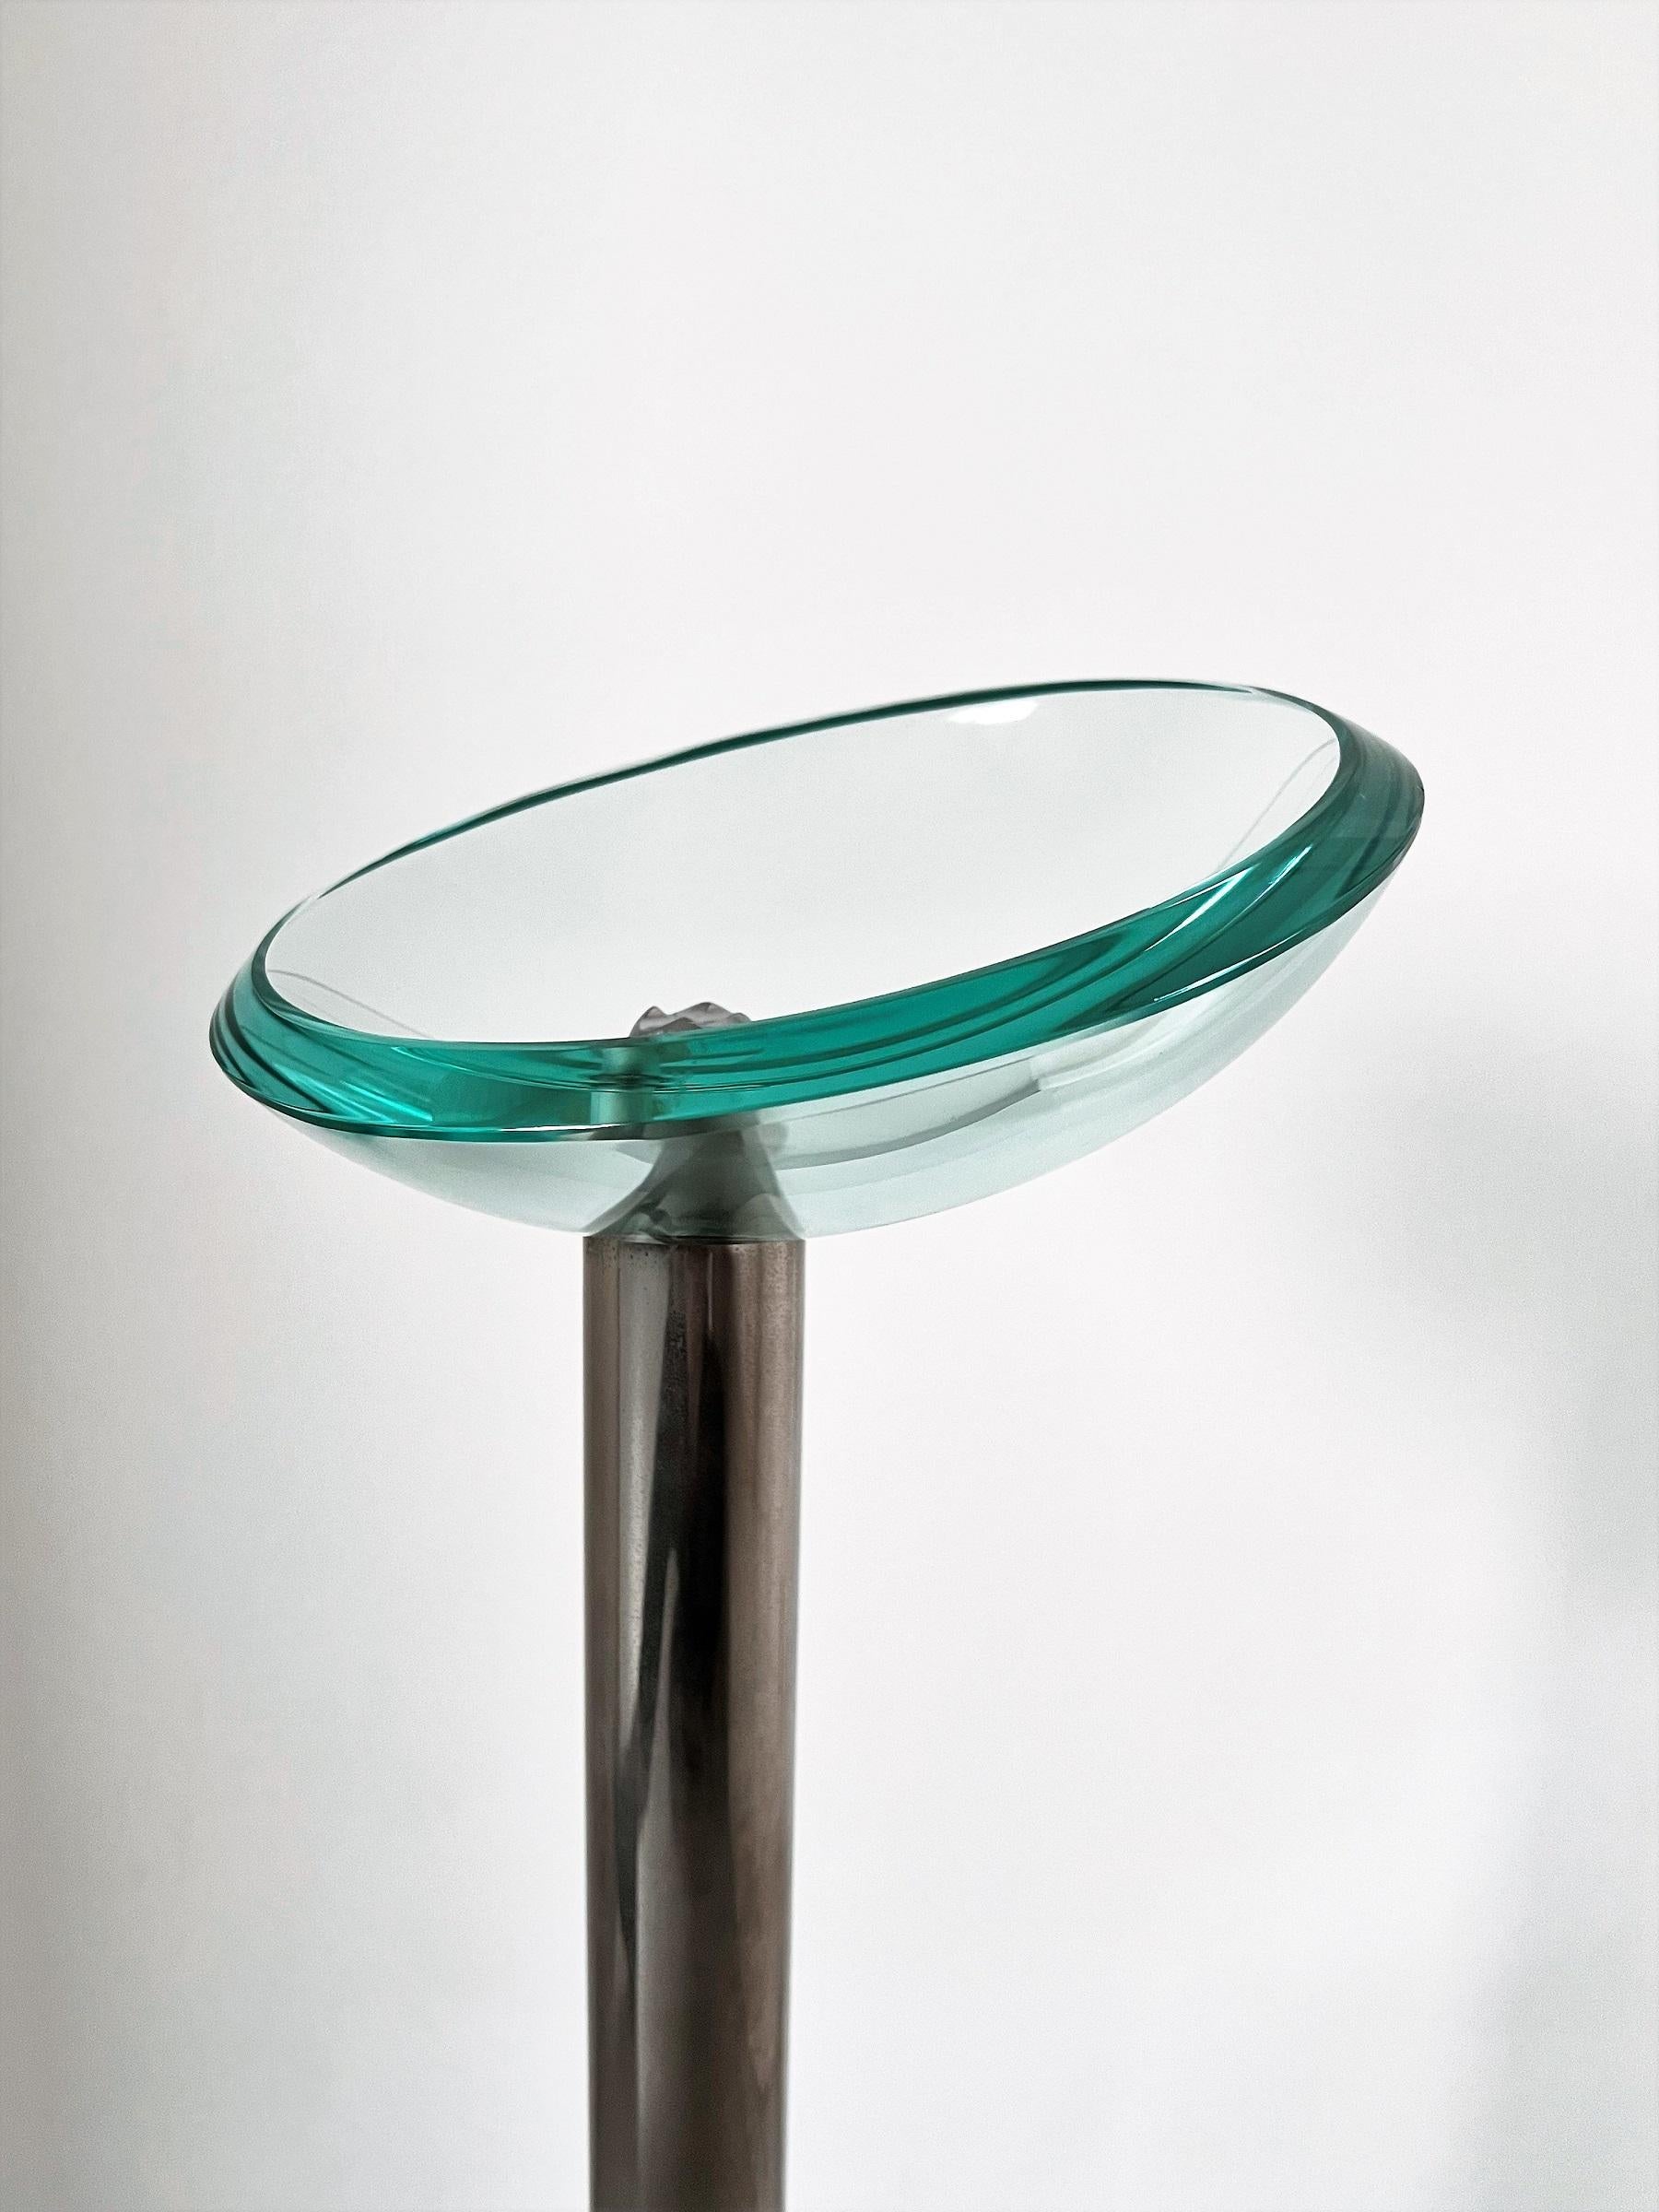 Late 20th Century Italian Mid-Century Floor Standing Glass Ashtray with Steel Base by Fontana Arte